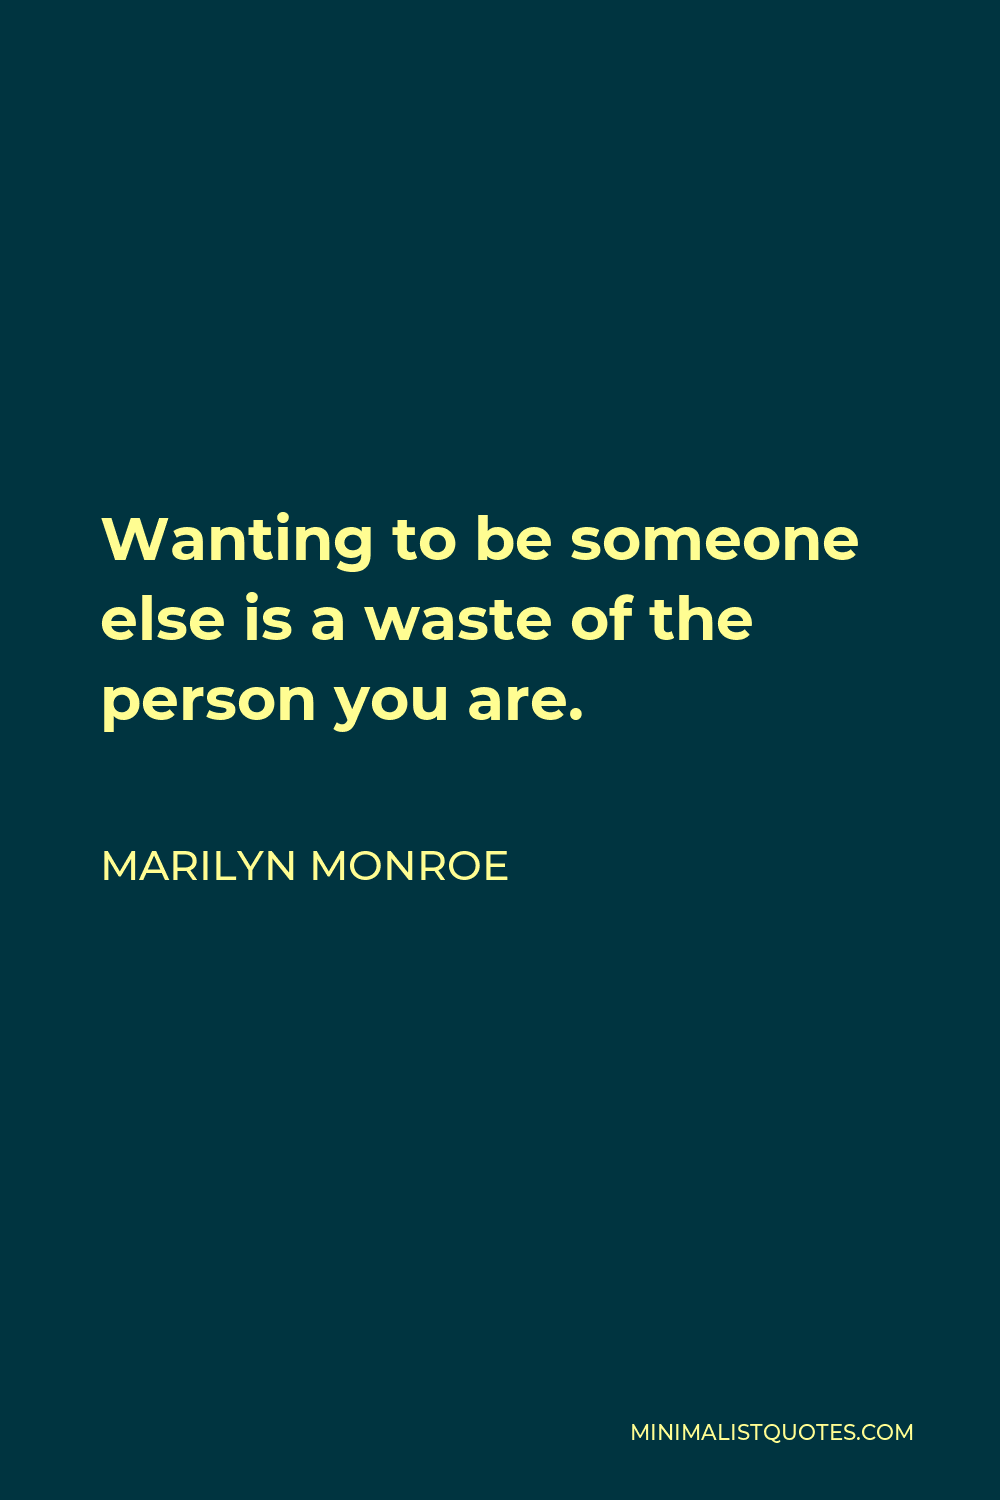 Marilyn Monroe Quote - Wanting to be someone else is a waste of the person you are.